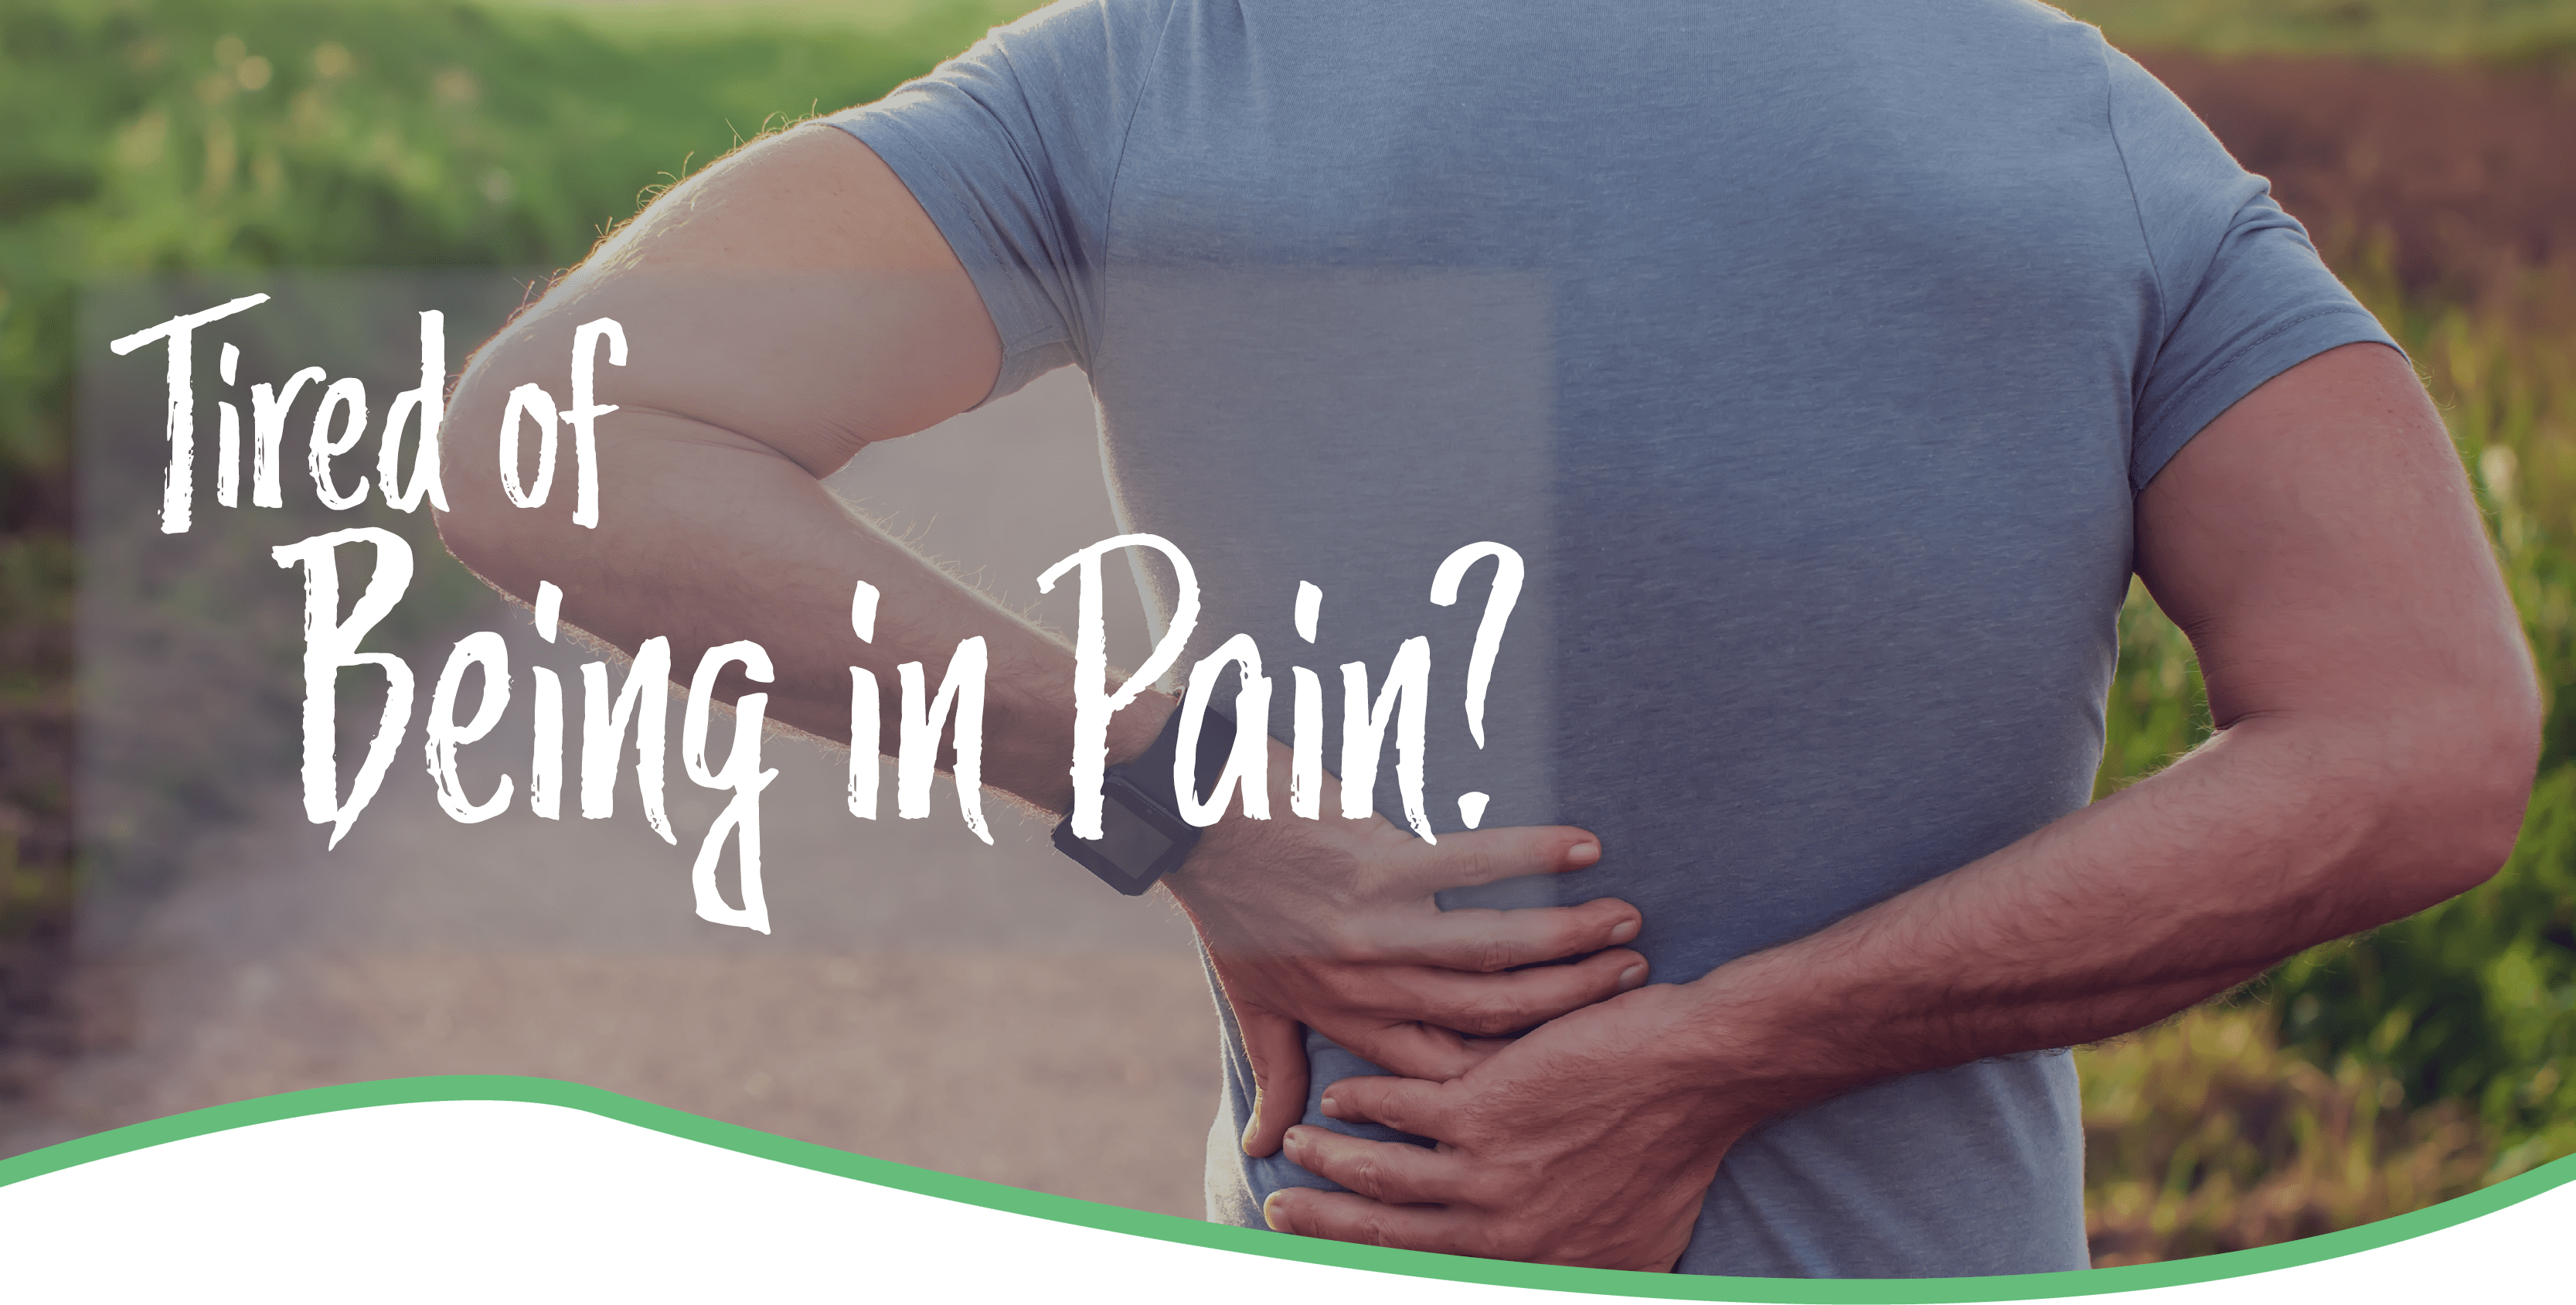 Tired of Being in Pain?